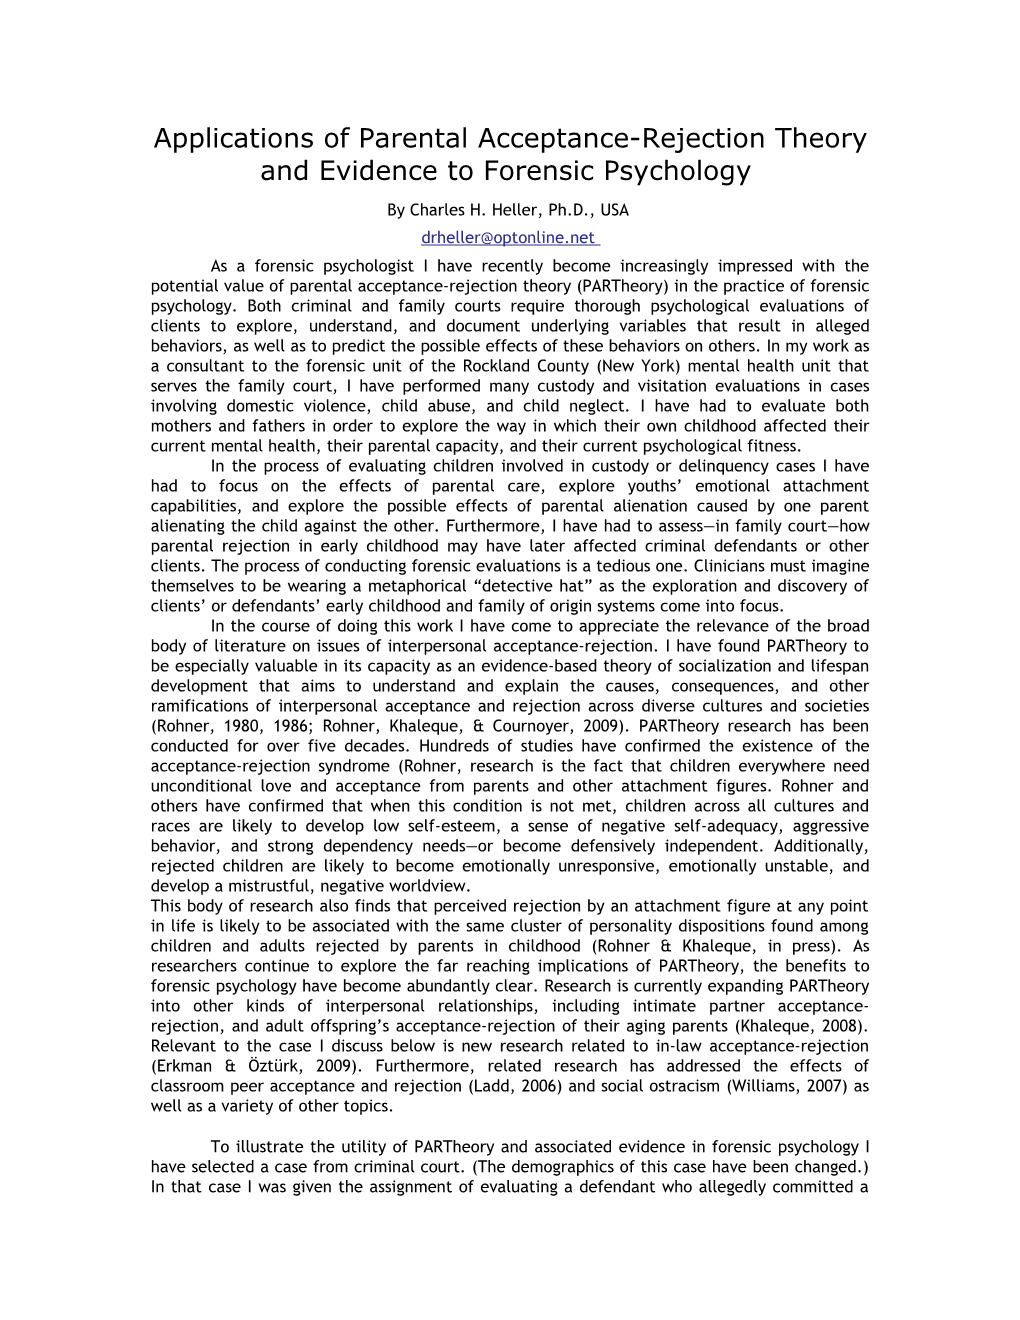 Applications of Parental Acceptance-Rejection Theory and Evidence to Forensic Psychology